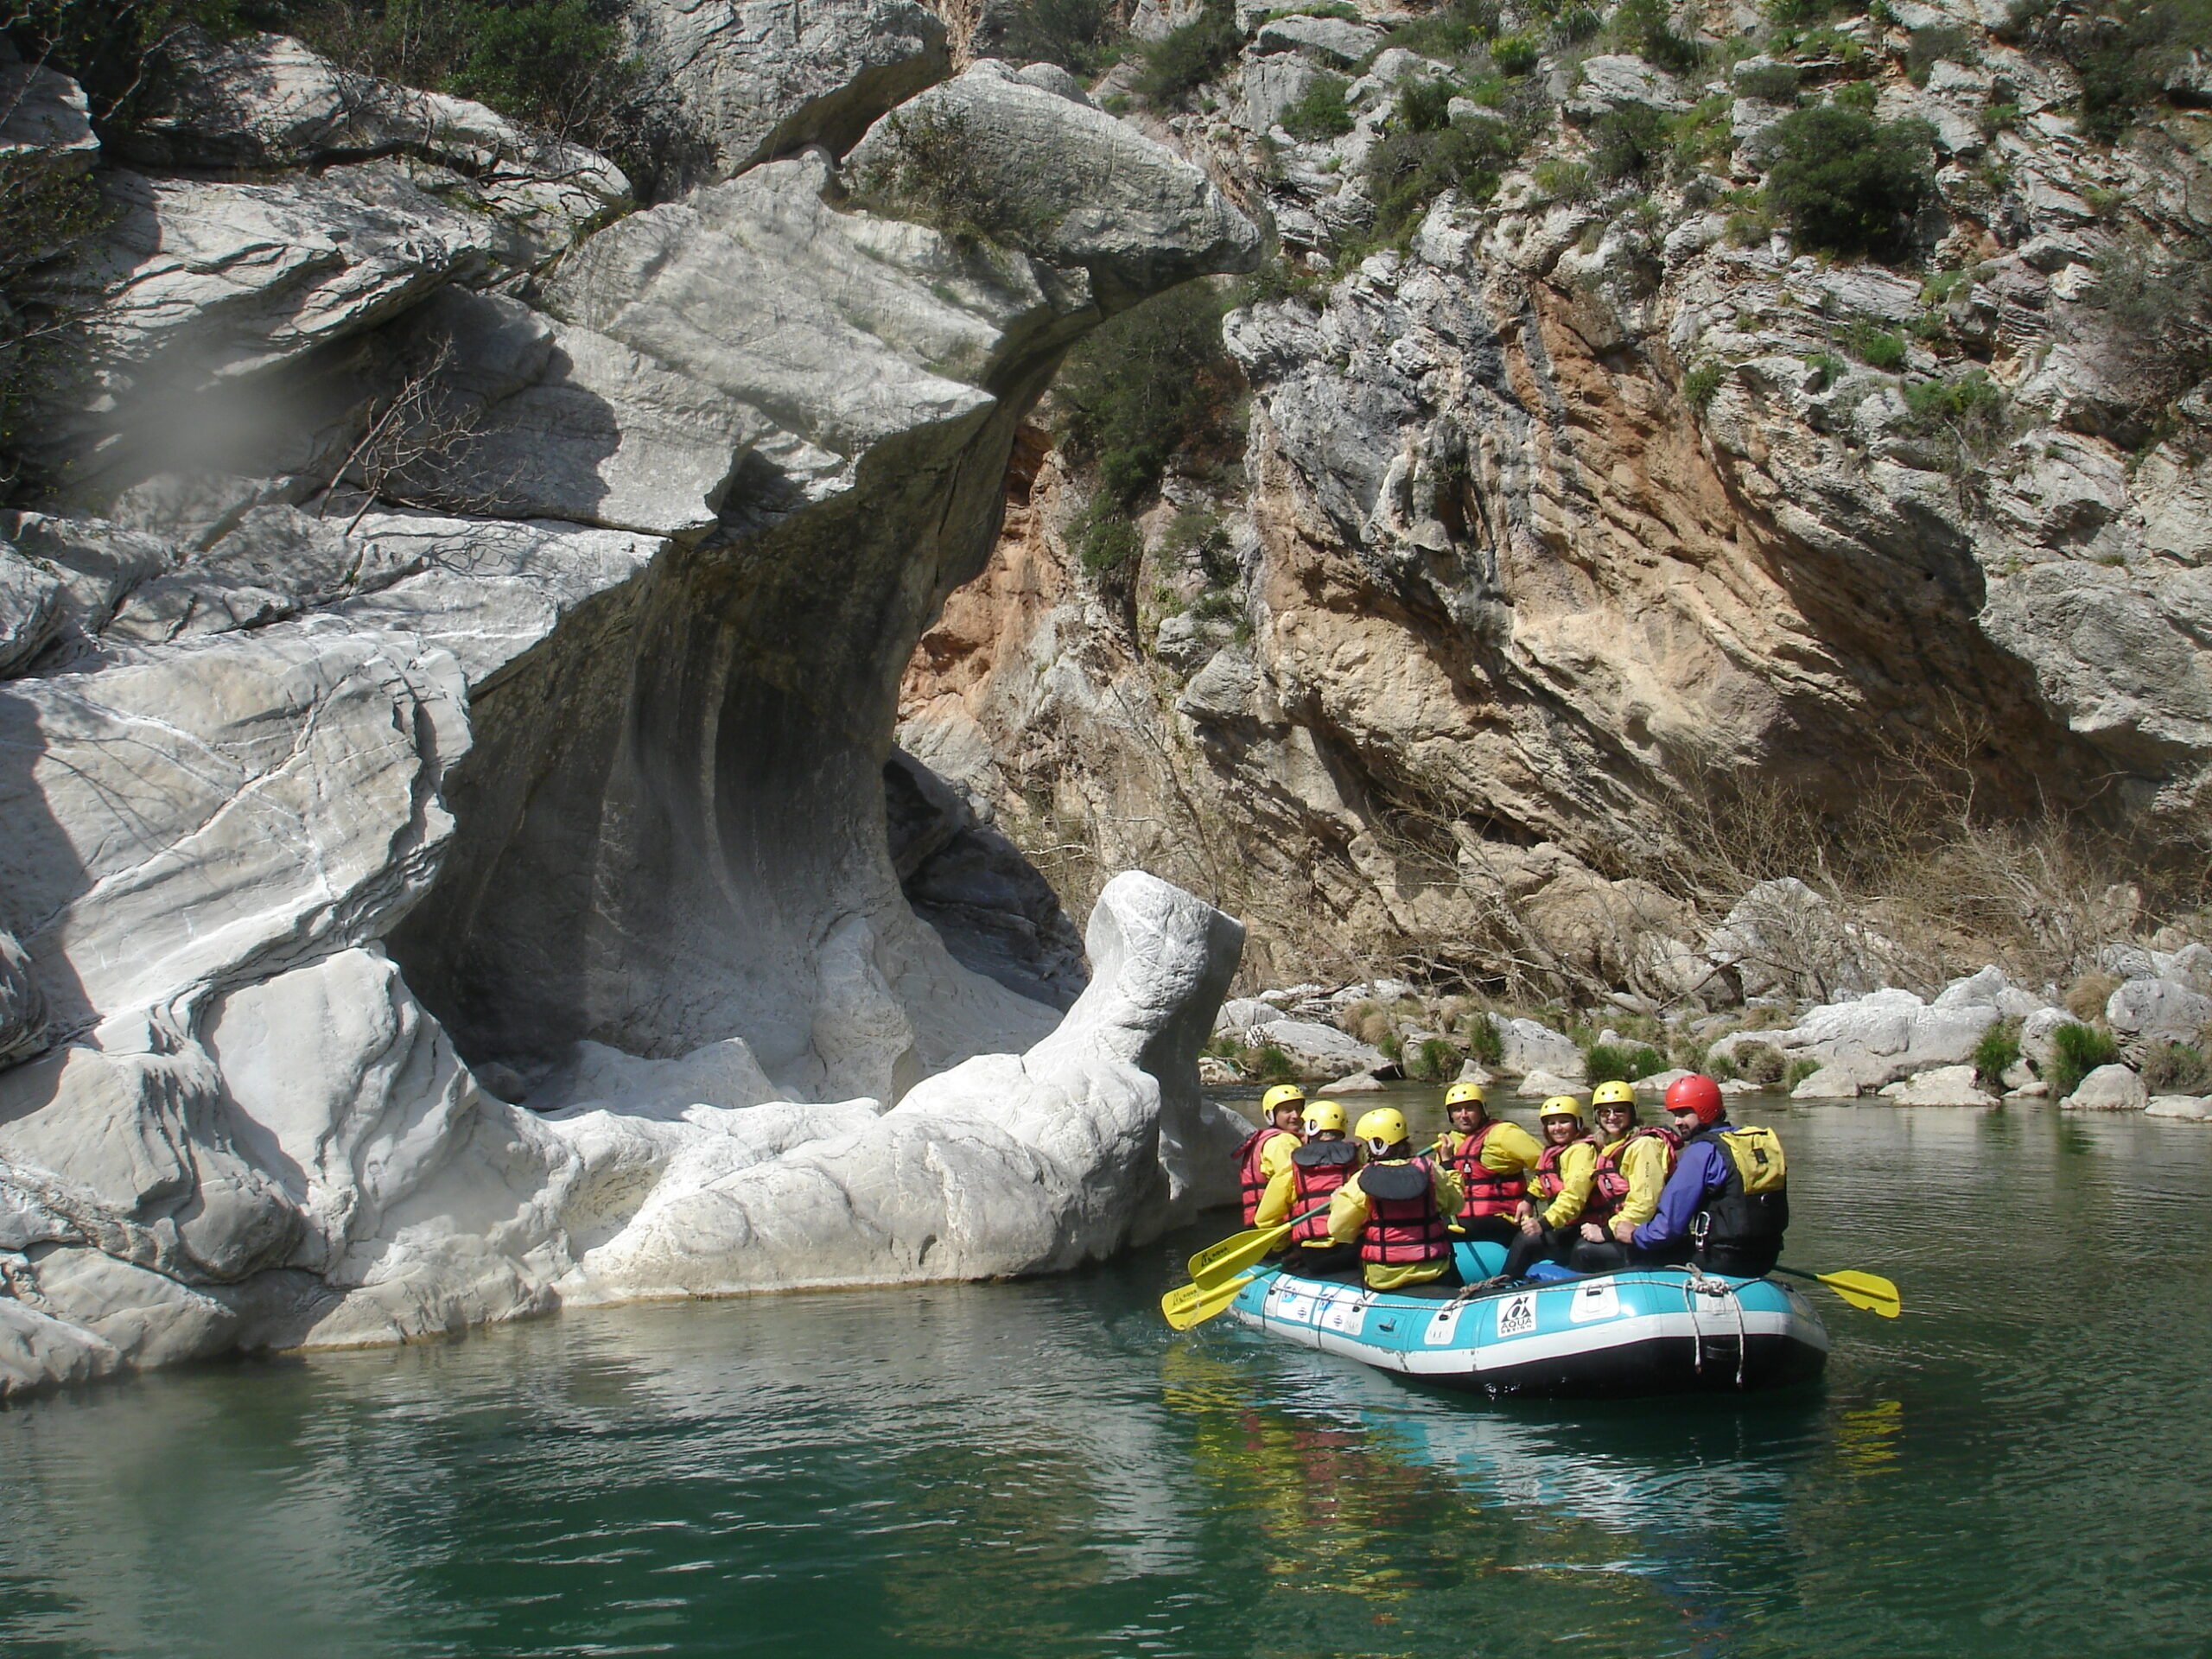 Discover Arcadia By Rafting The Lousios River On The Lousios River Rafting Tour From Vlachorraptis Village_99